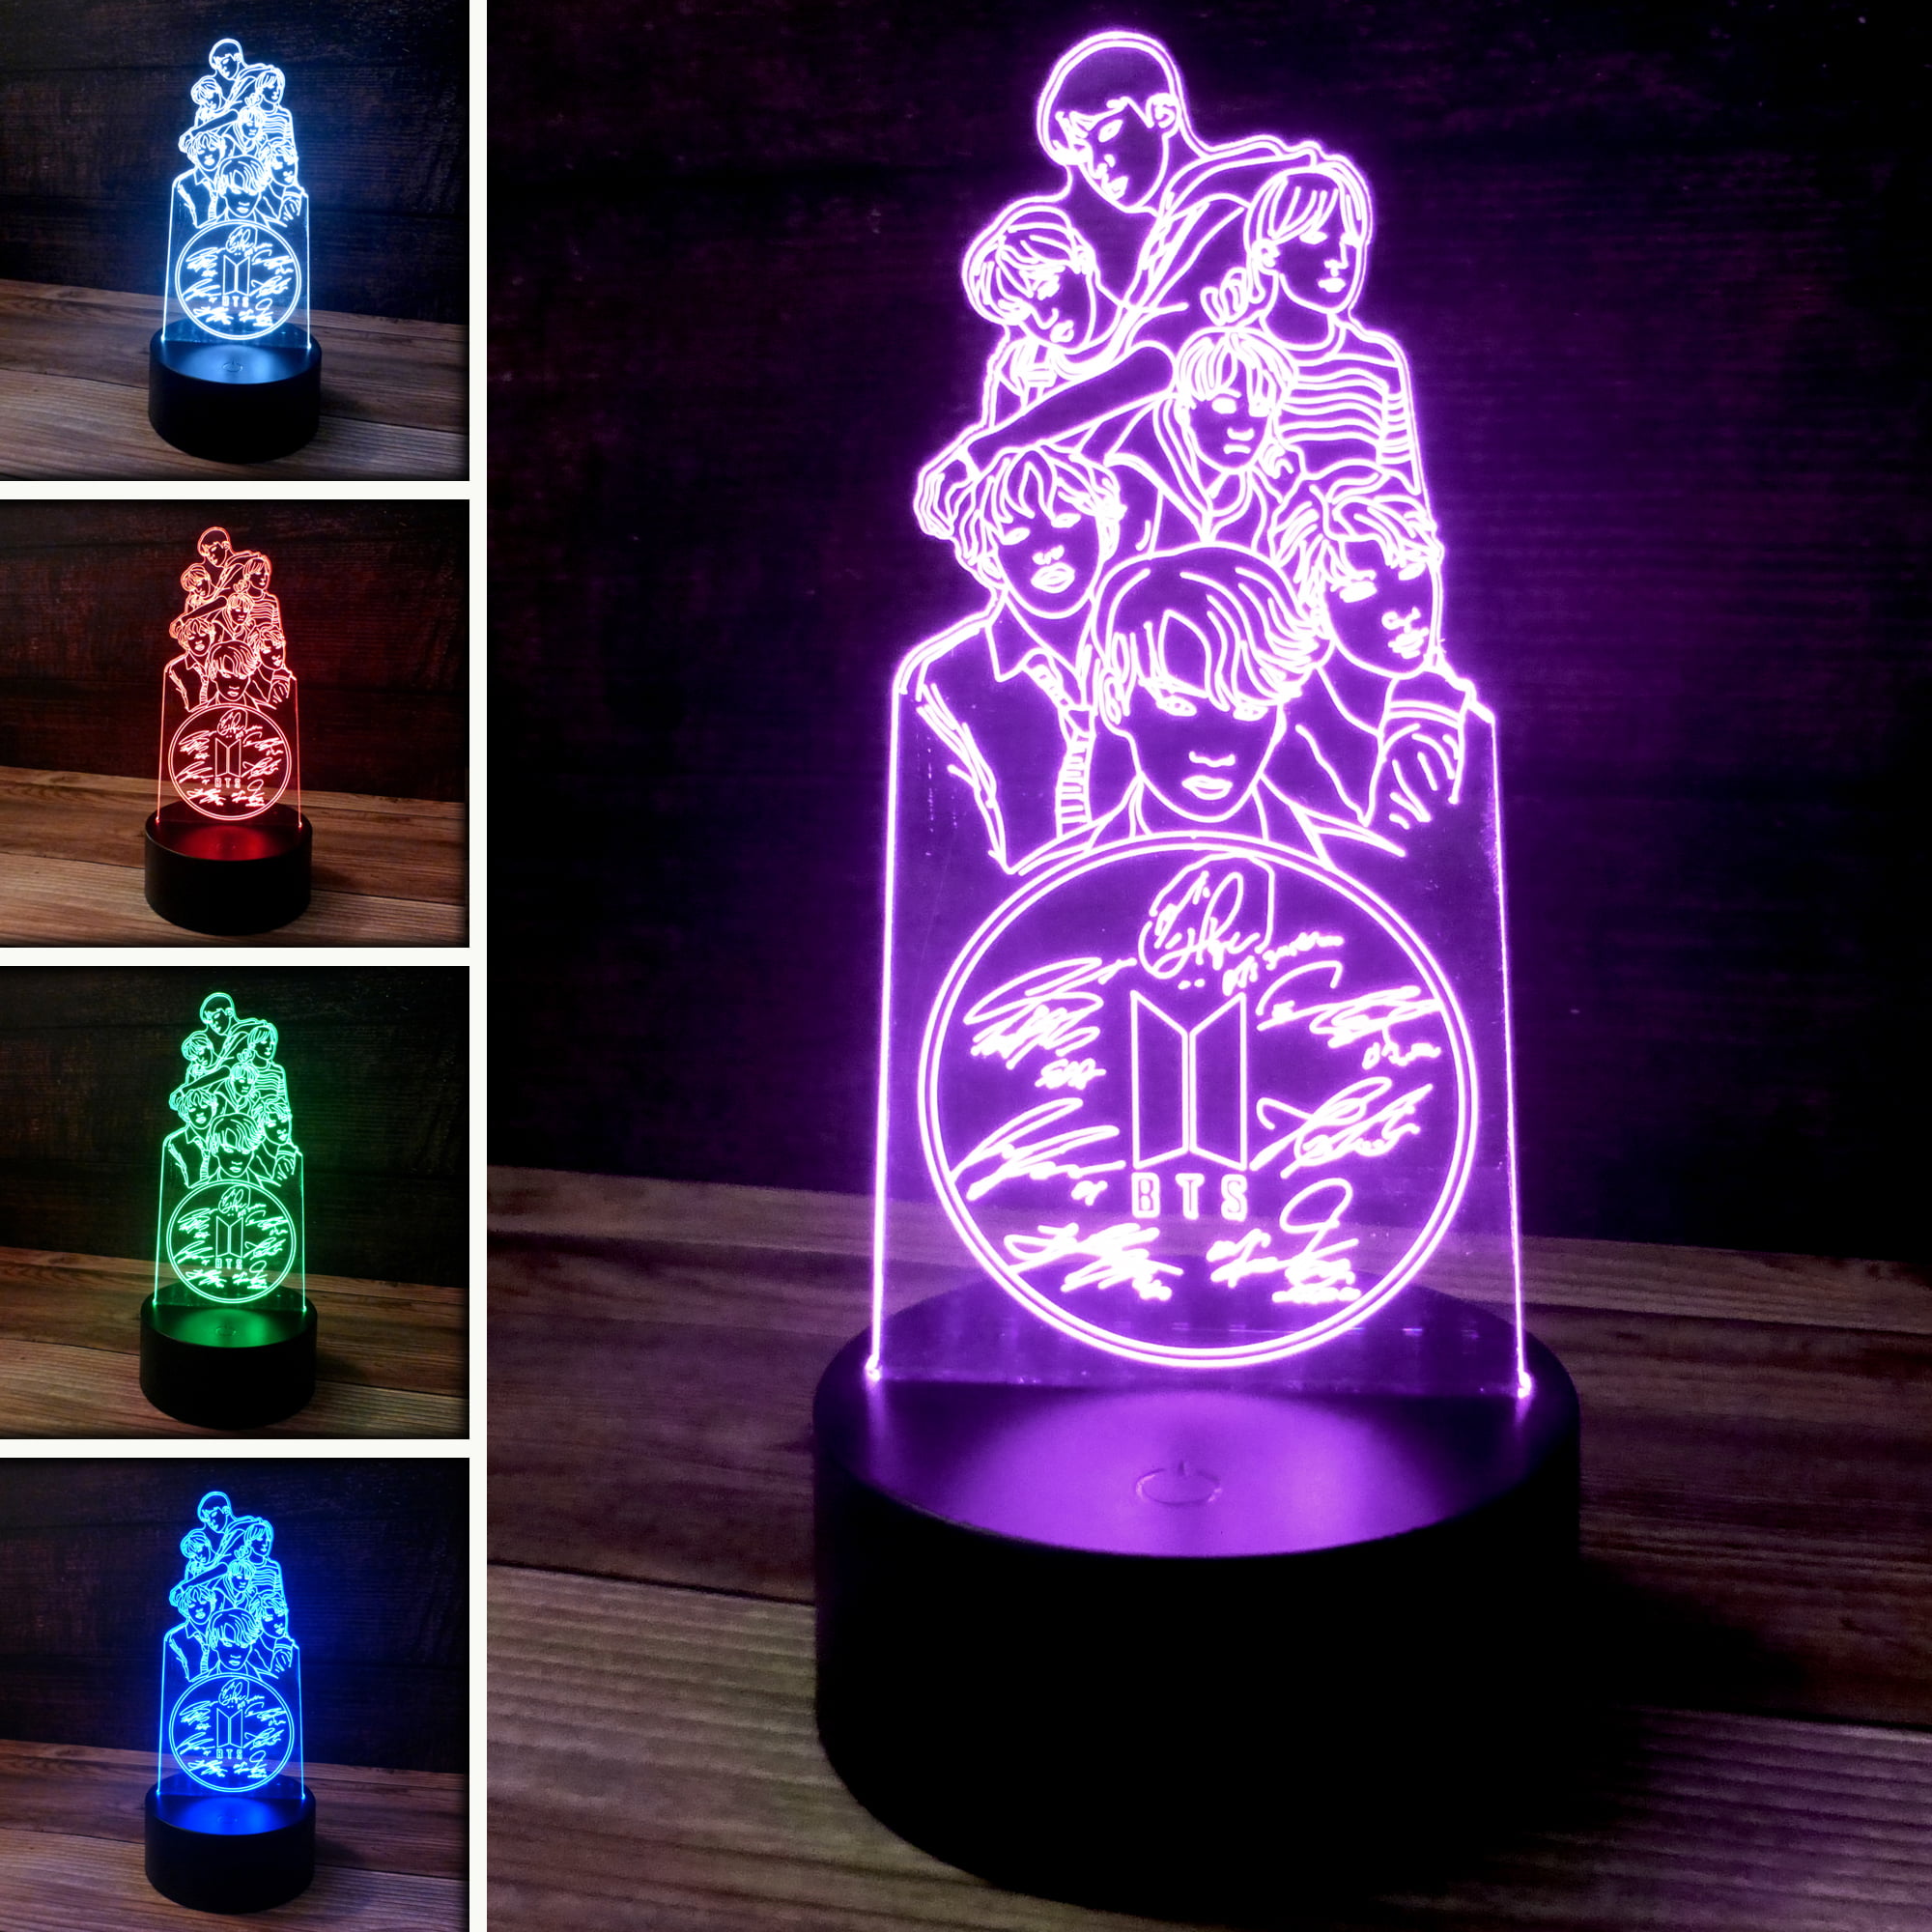 3D BTS Desk Light - 7 Color LED Lamp Base with USB Battery and Touch control Rotating Fade or Solid Color mode. Makes a perfect Nightlight for Kids or Unique Gift